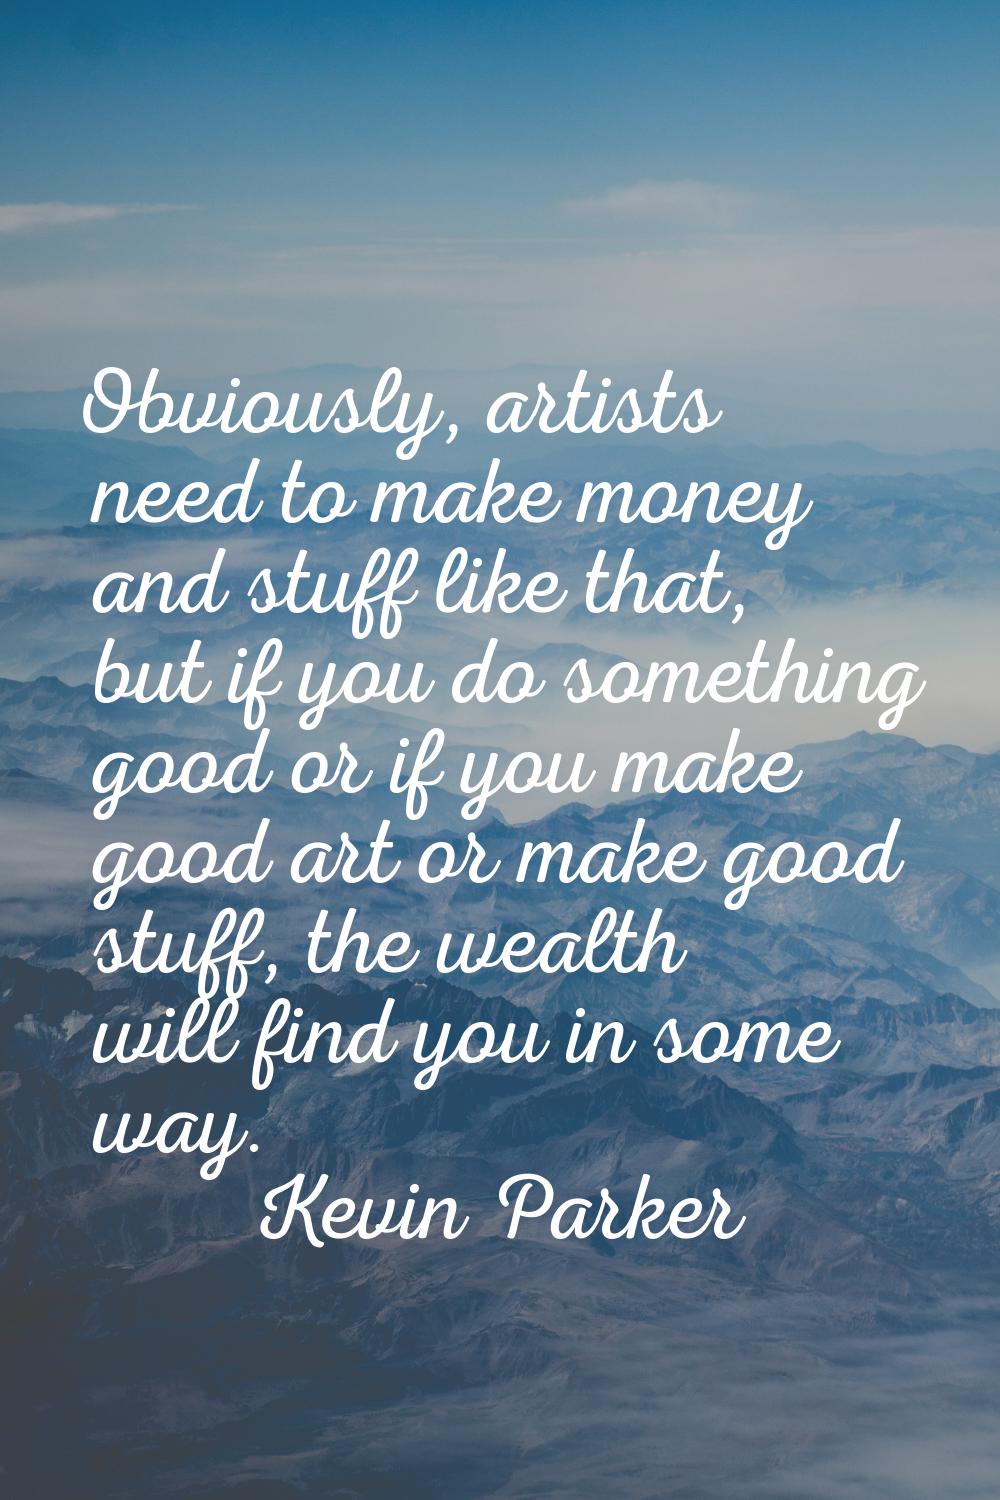 Obviously, artists need to make money and stuff like that, but if you do something good or if you m